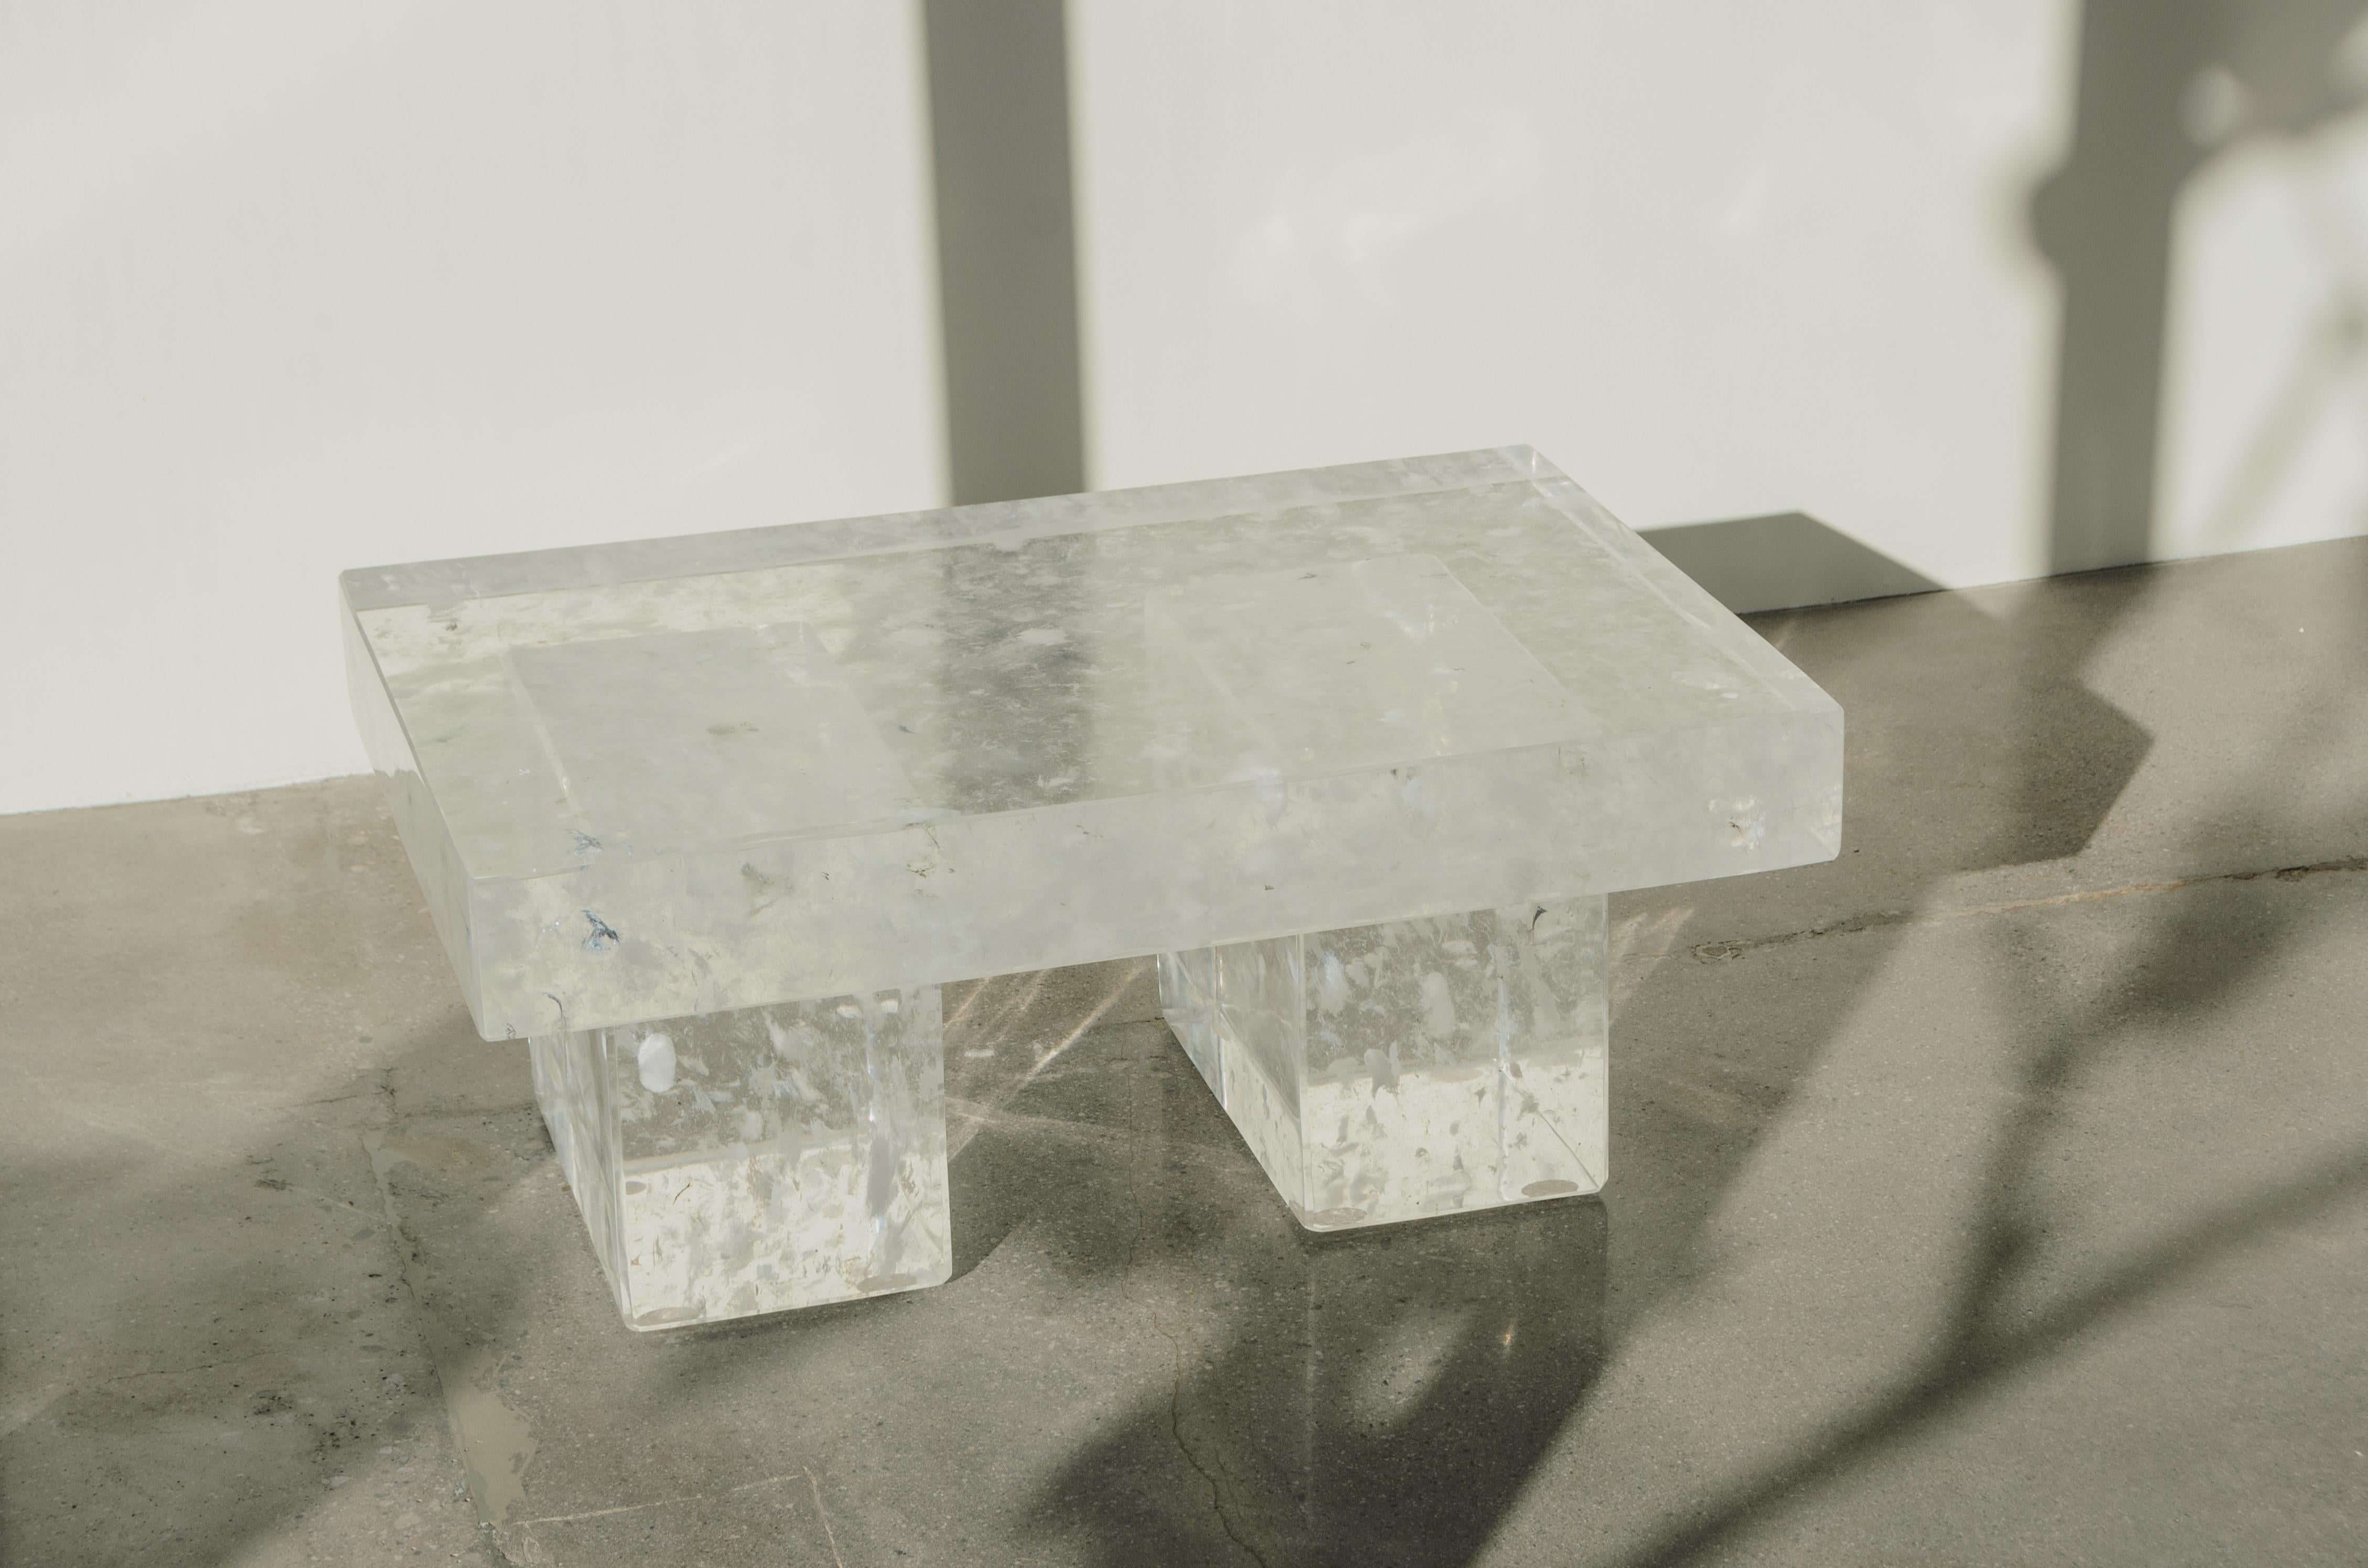 Minimalist 3 Piece Contemporary Crystal Table by Robert Kuo, Limited Edition 